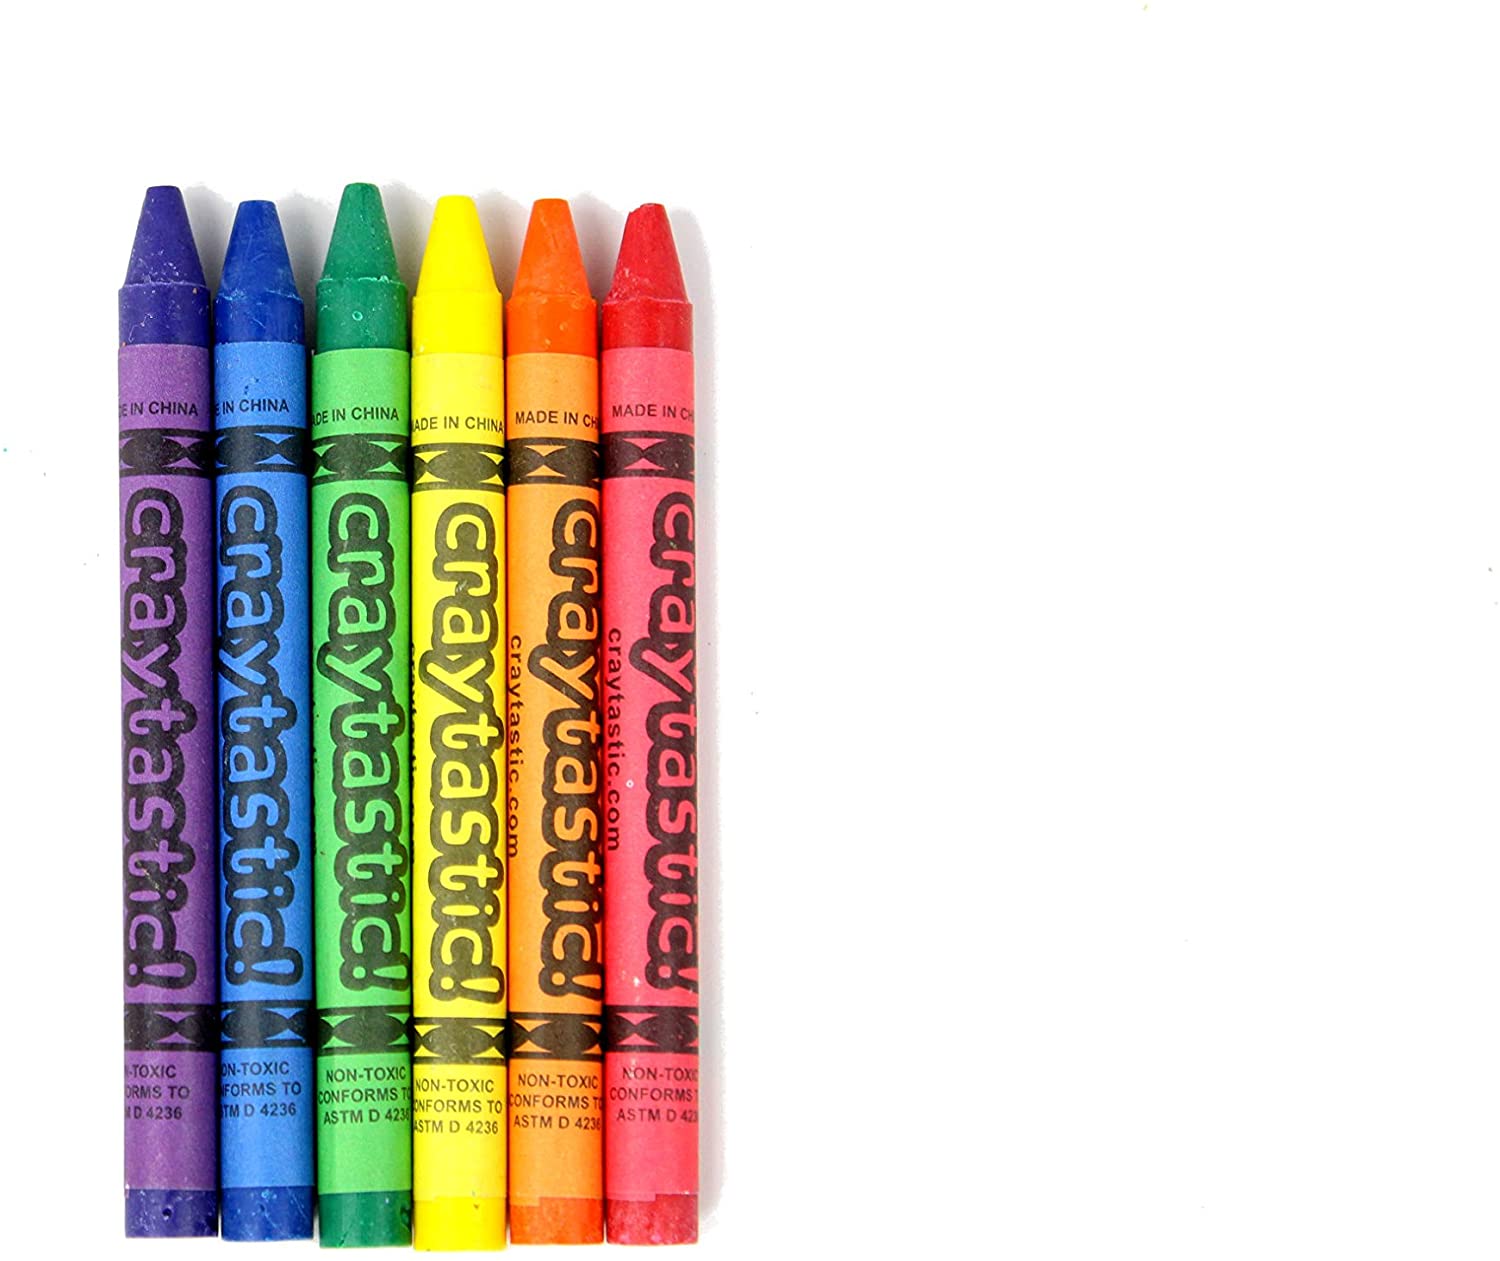 6 Pack of Crayons with 2 Crayon Sharpeners, Crayons 16 Count, Assorted Colors – Crayons Bulk, Crayons Bulk for Classroom, School Supplies for Kids